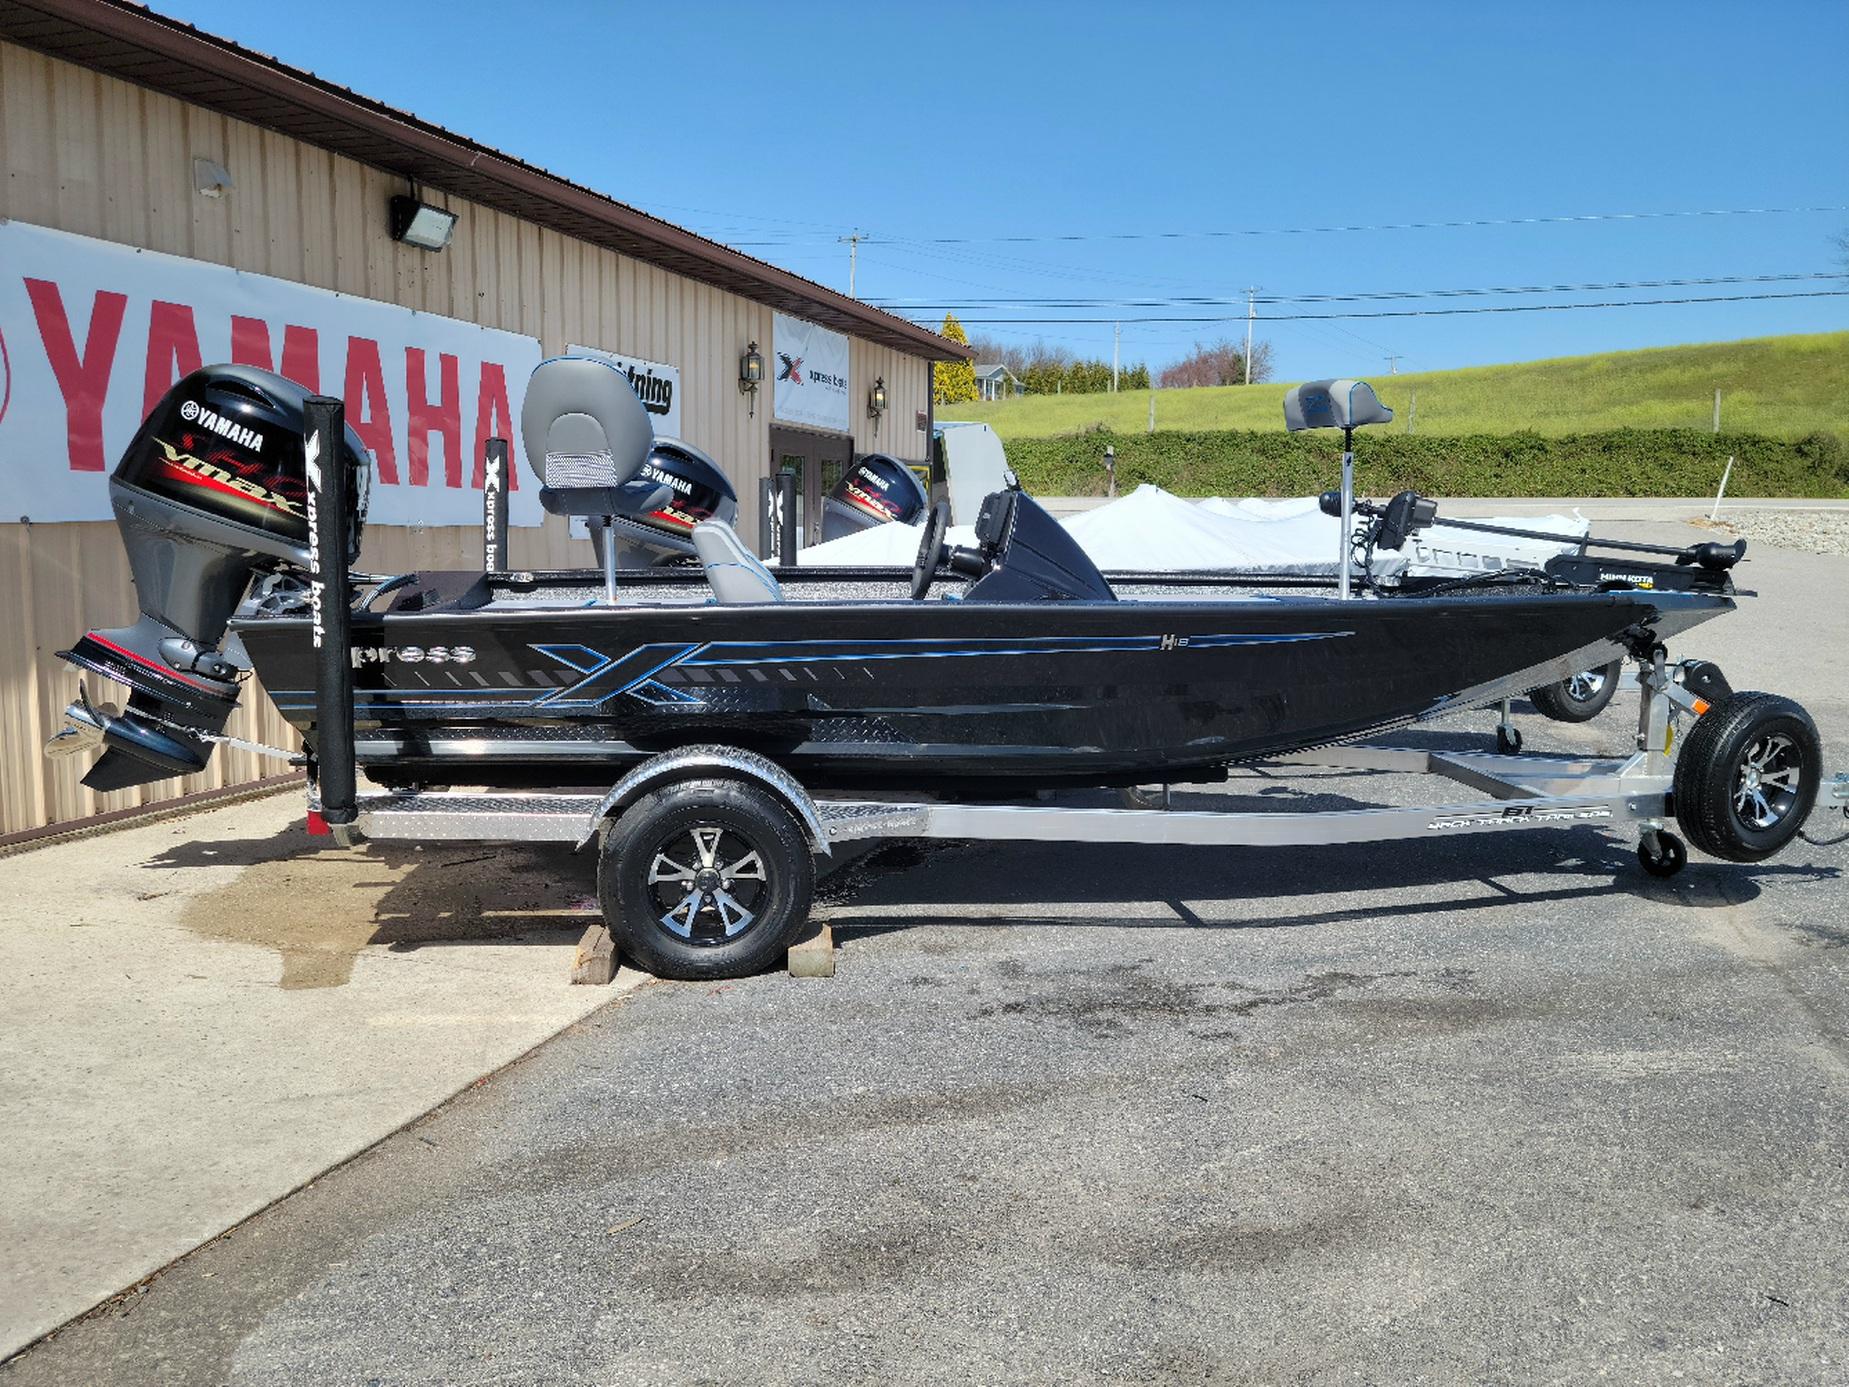 Xpress H18c Crappie boats for sale 